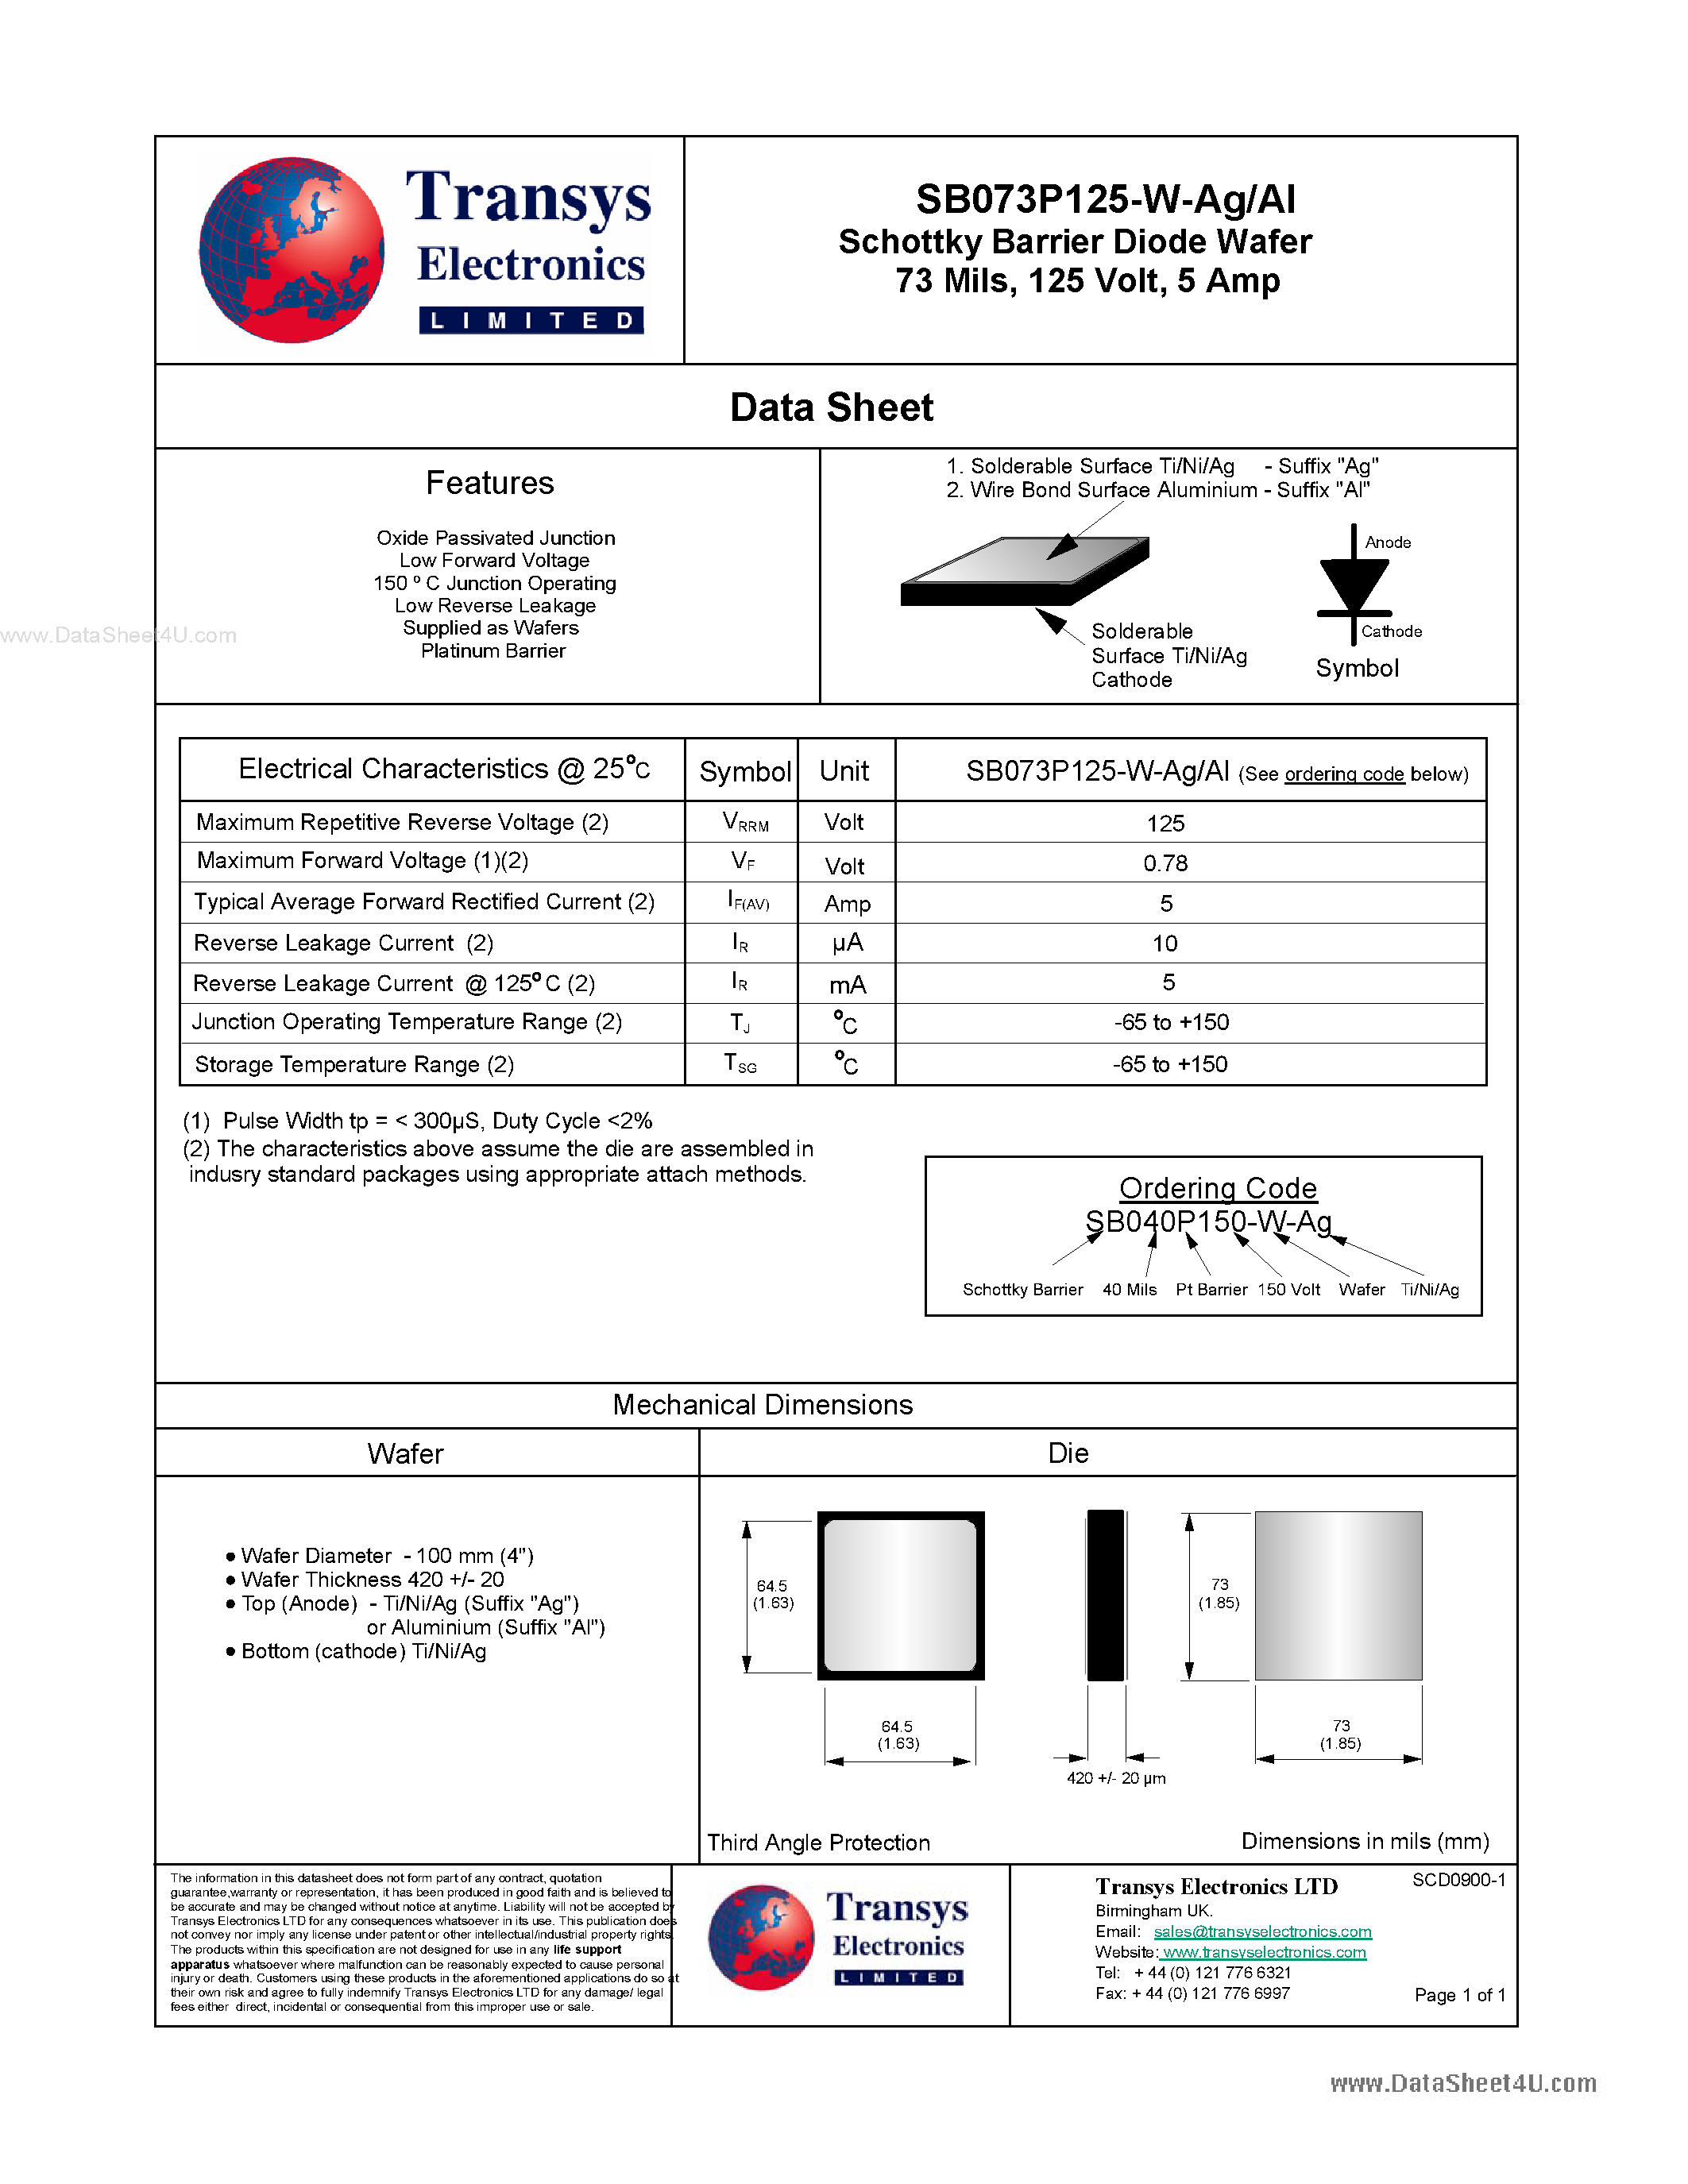 Datasheet SB073P125-W-AG - Schottky Barrier Diode Wafer page 1